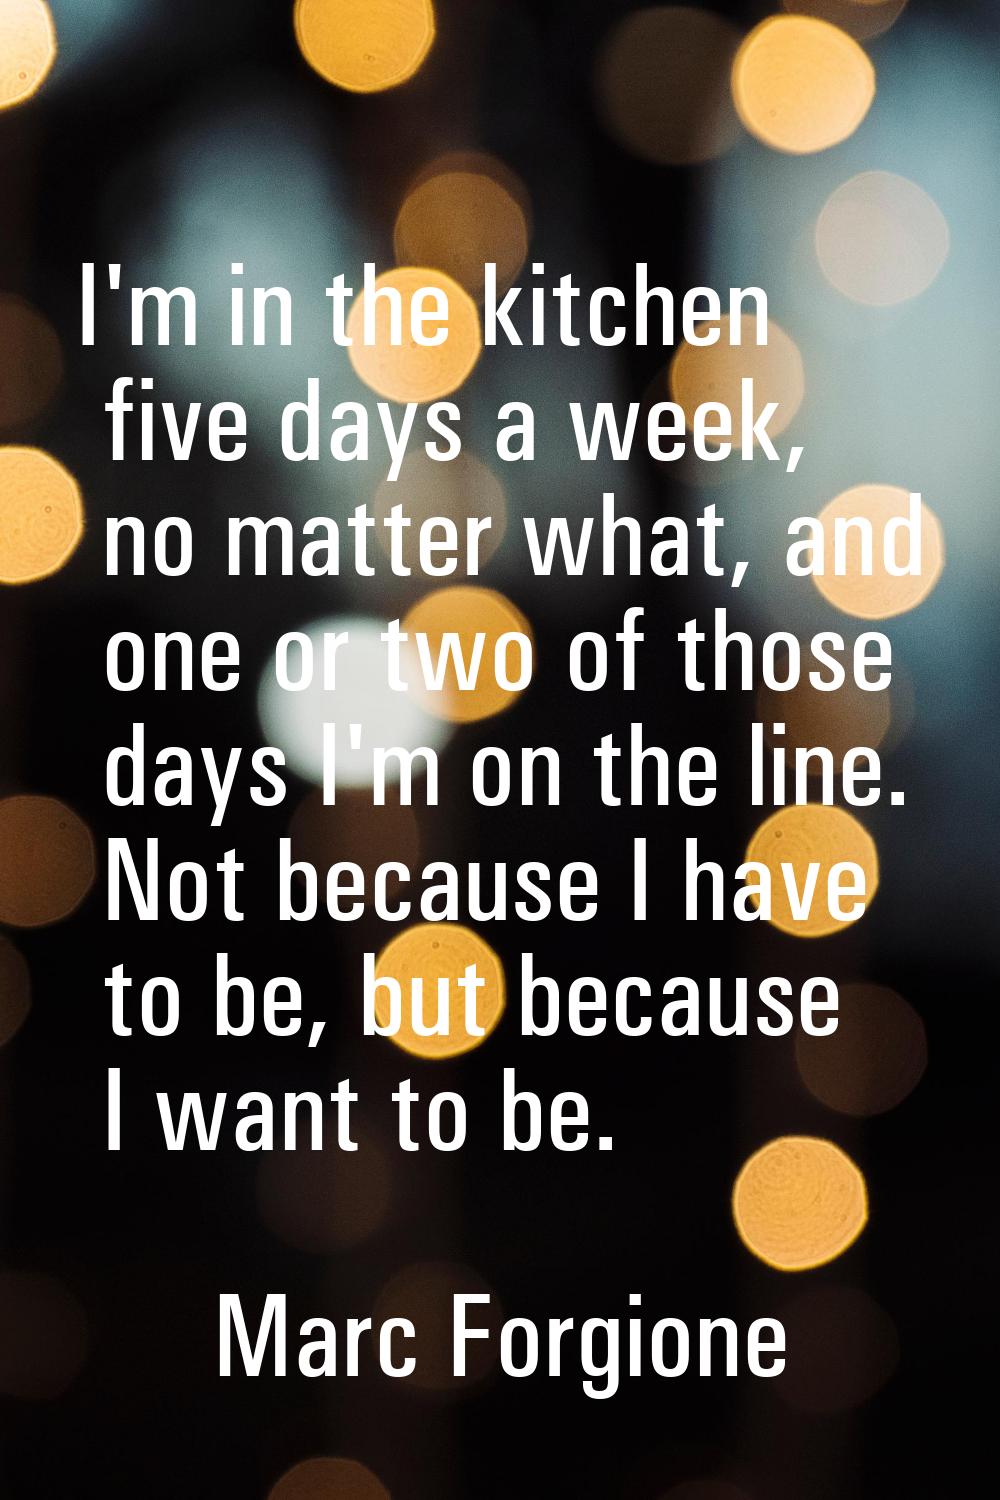 I'm in the kitchen five days a week, no matter what, and one or two of those days I'm on the line. 